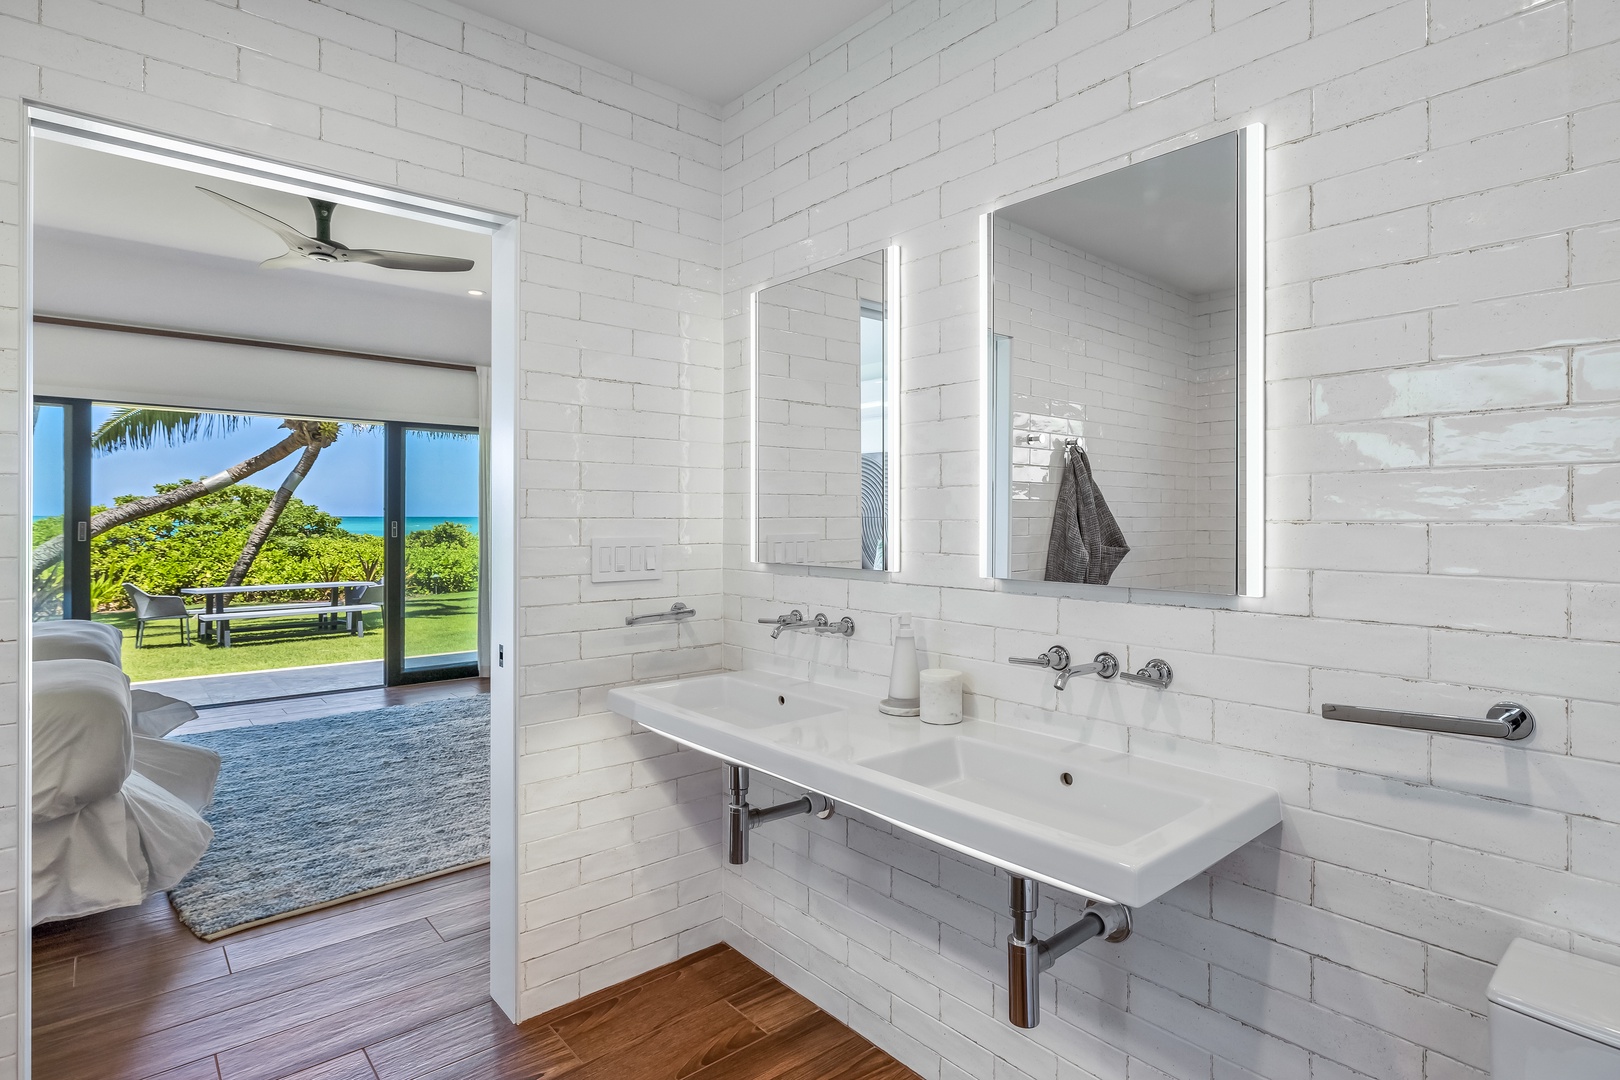 Kailua Vacation Rentals, Kailua Beach Villa - Makai North suite ensuite bathroom with dual sink and a walk-in shower